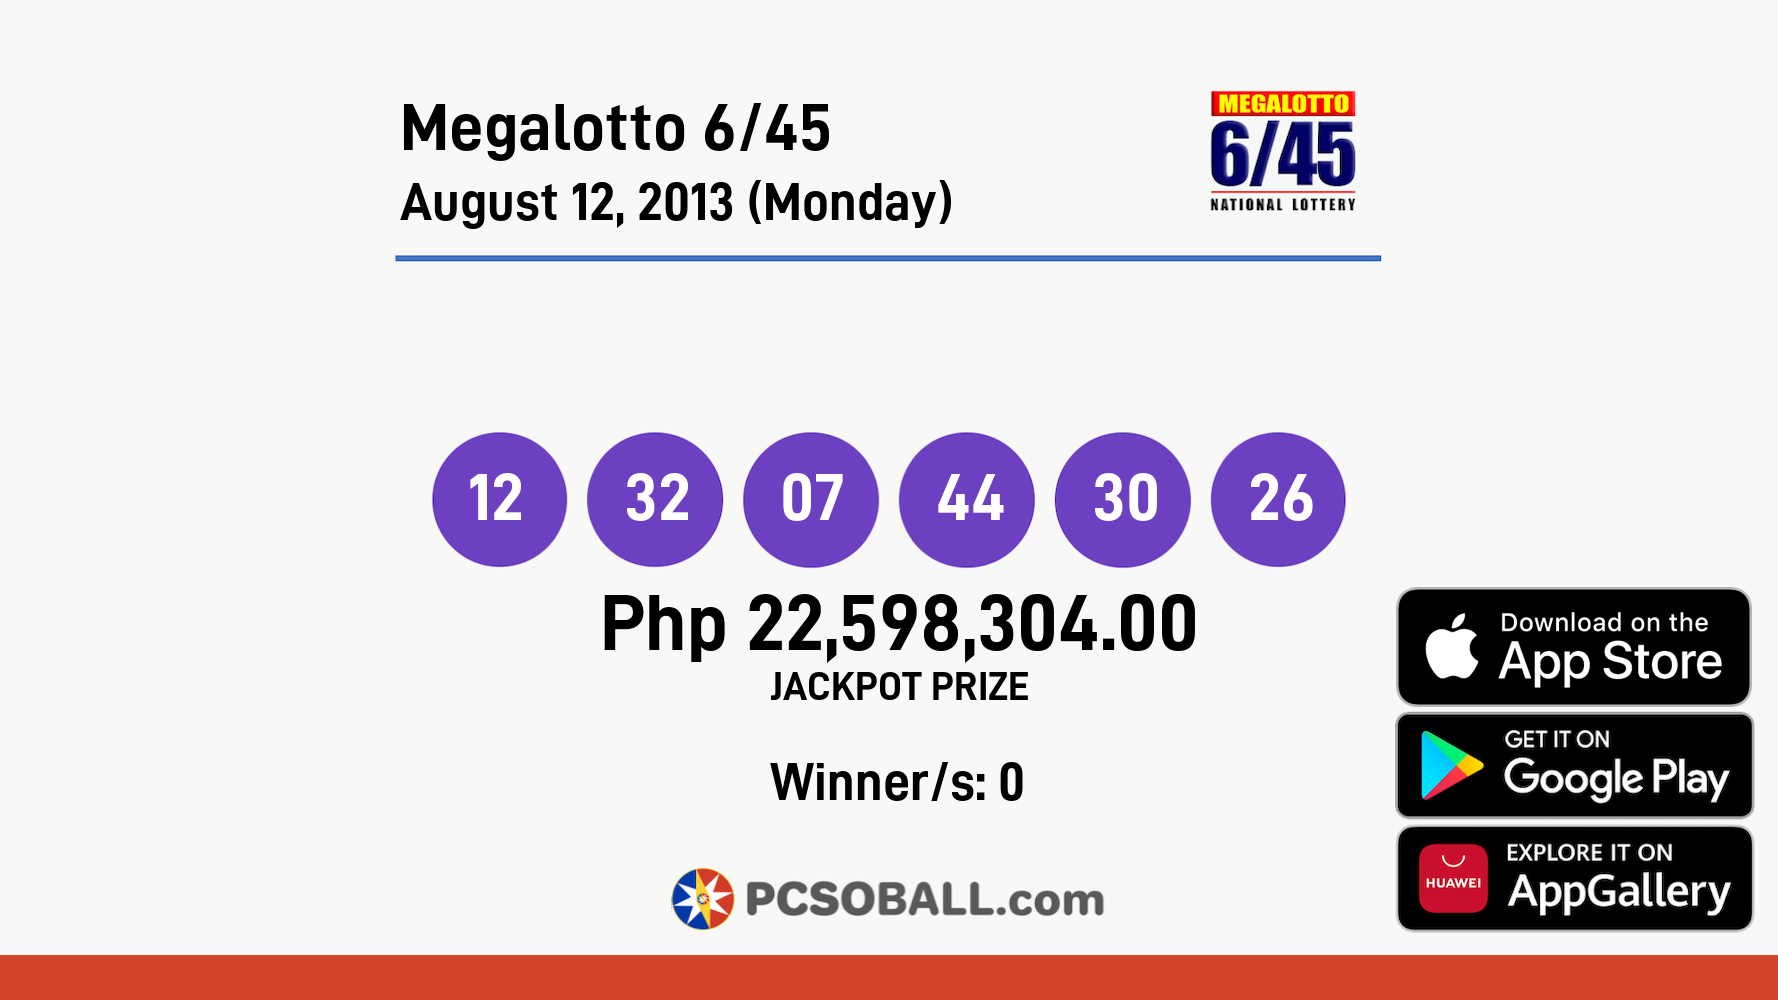 Megalotto 6/45 August 12, 2013 (Monday) Result